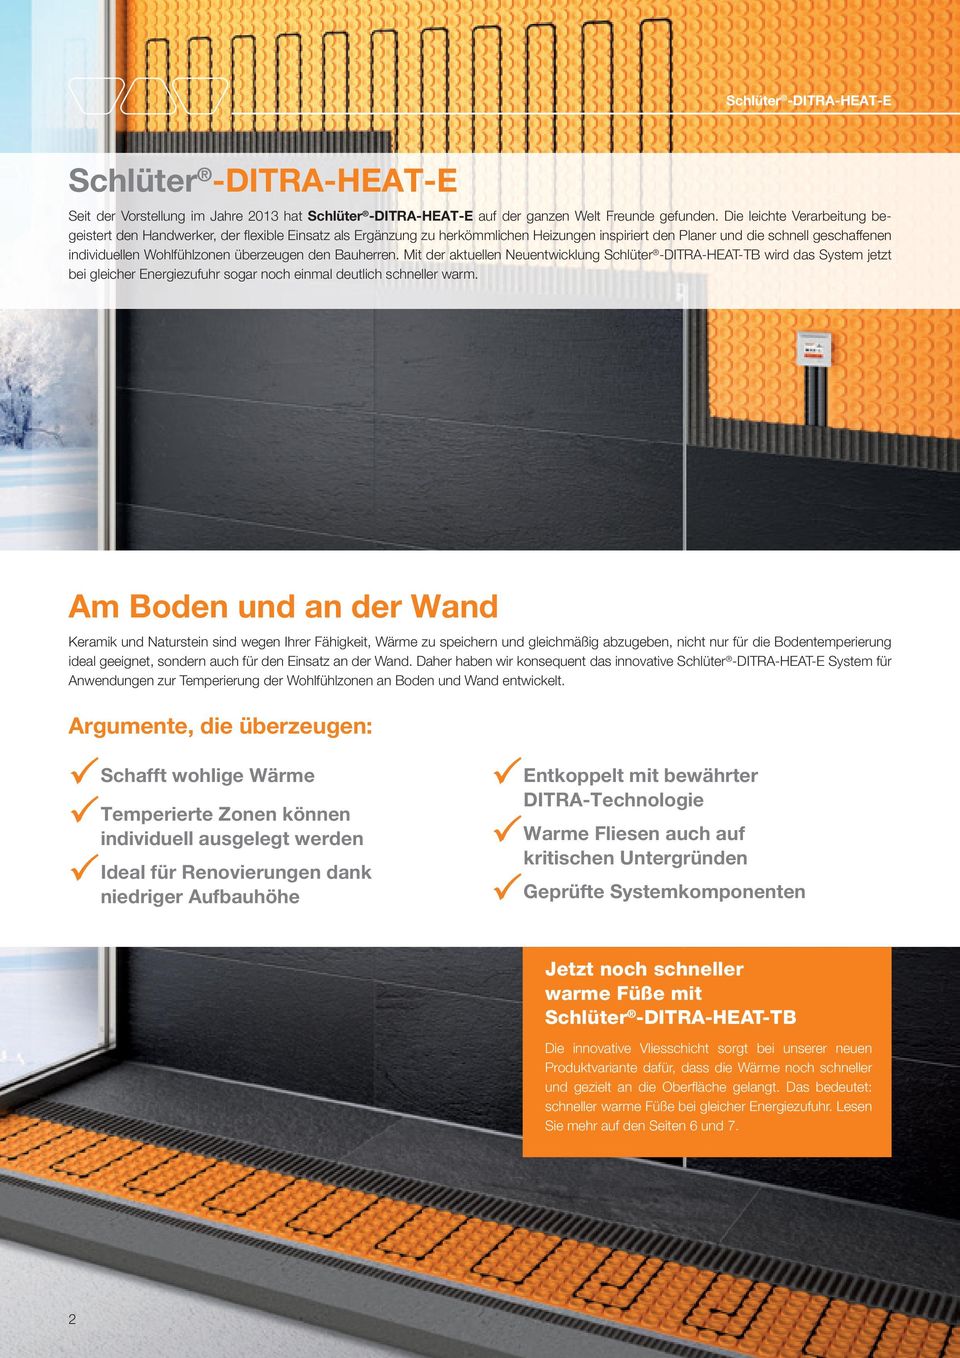 Schluter Ditra Heat E Pdf Free Download